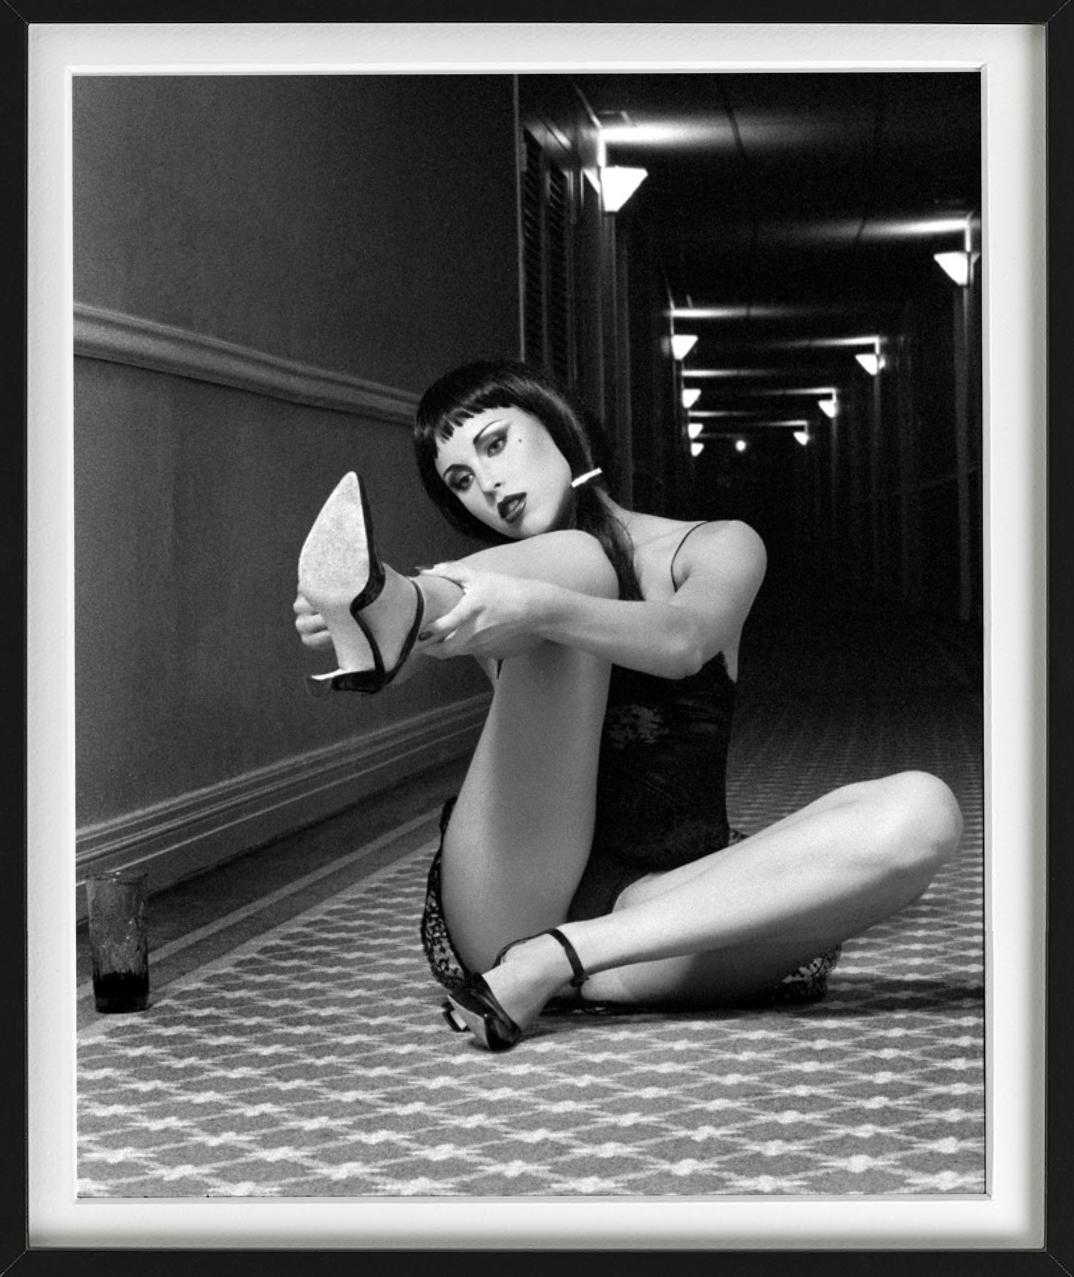 'Tove playing with her shoe' - cinematic b&w portrait, fine art photography 1995 - Photograph by Guido Argentini